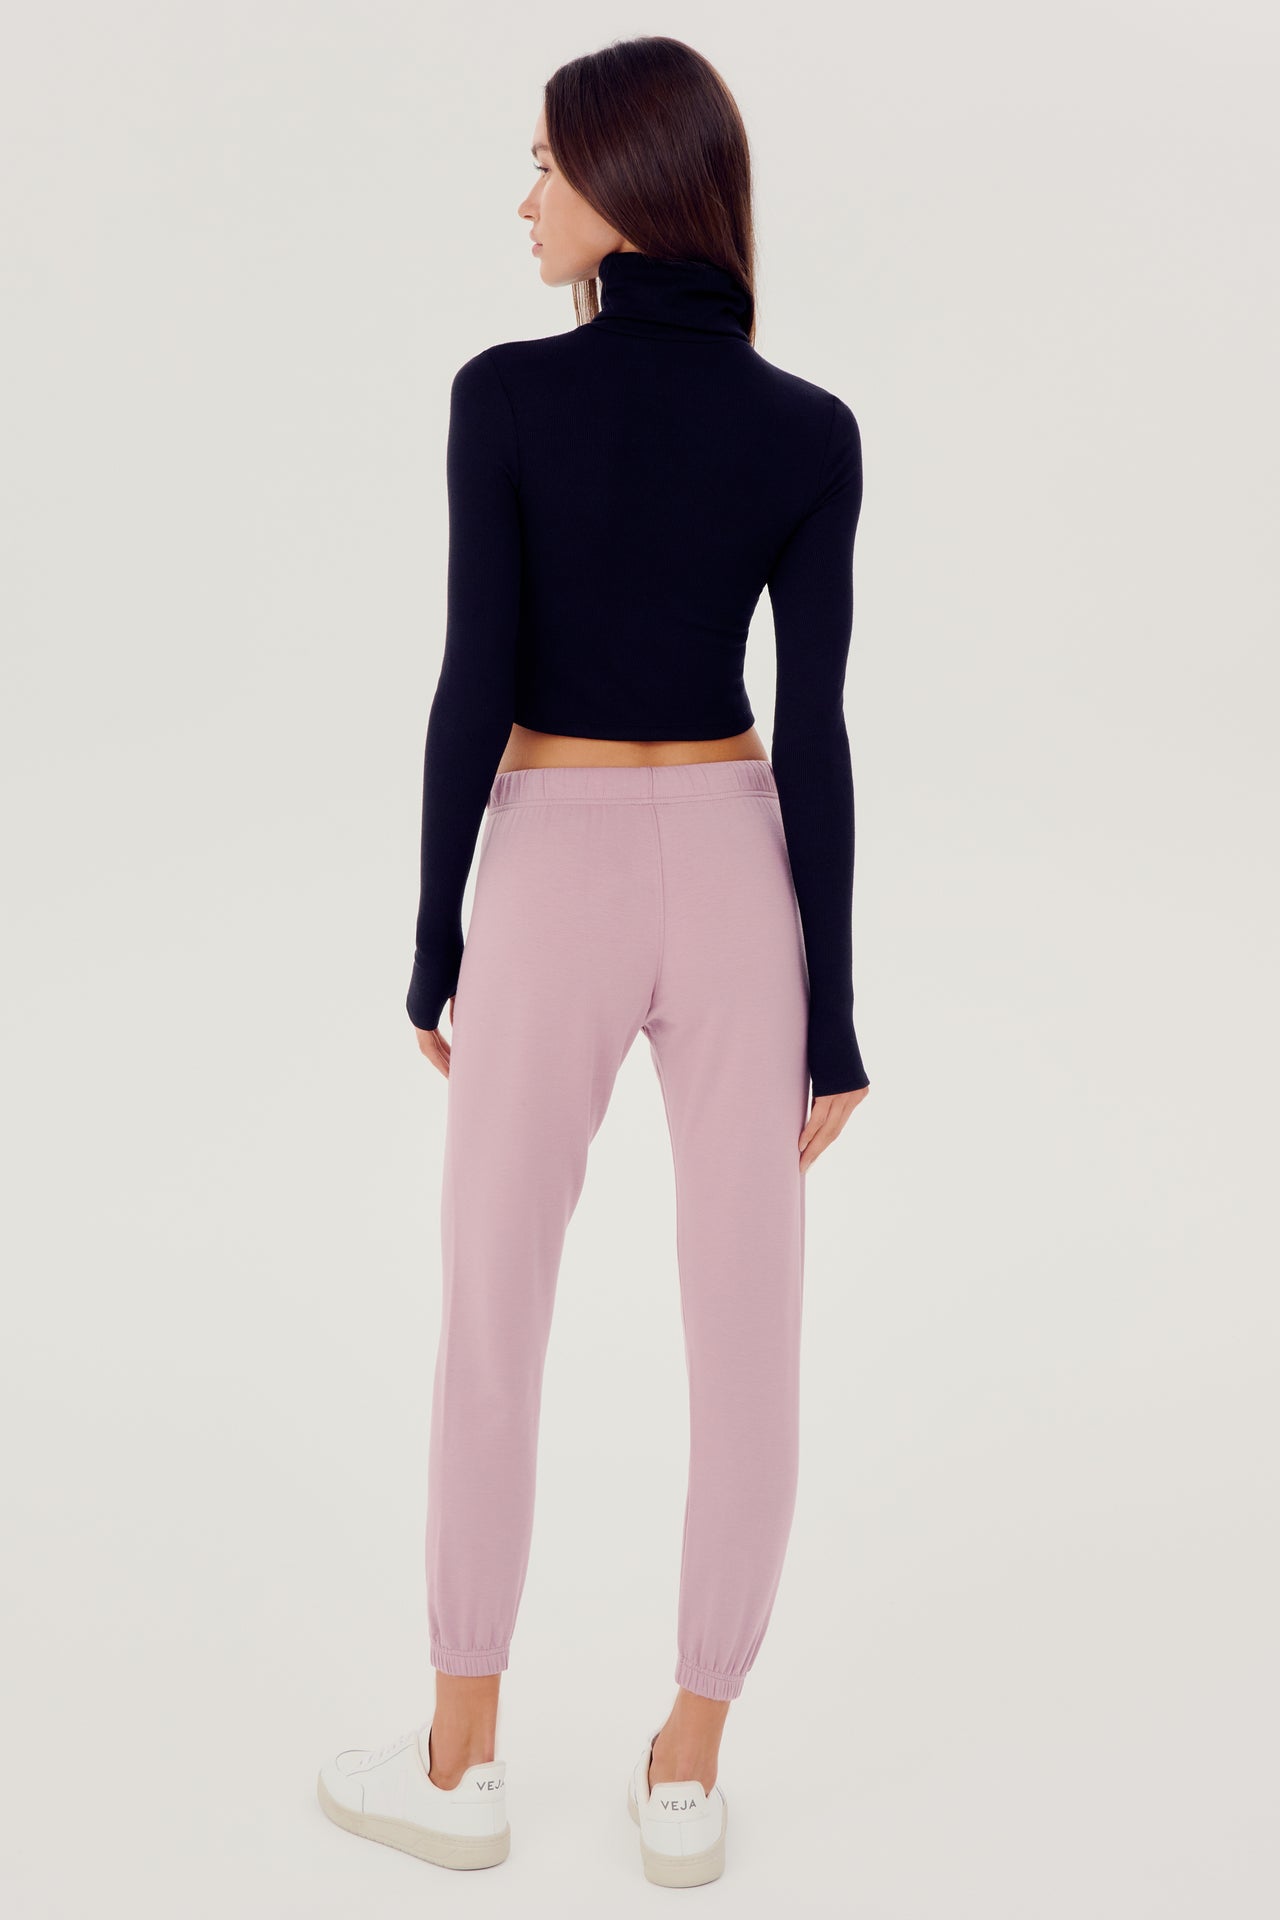 The back view of a woman wearing a black SPLITS59 Jackson Rib Cropped Turtleneck and pink high waist leggings.